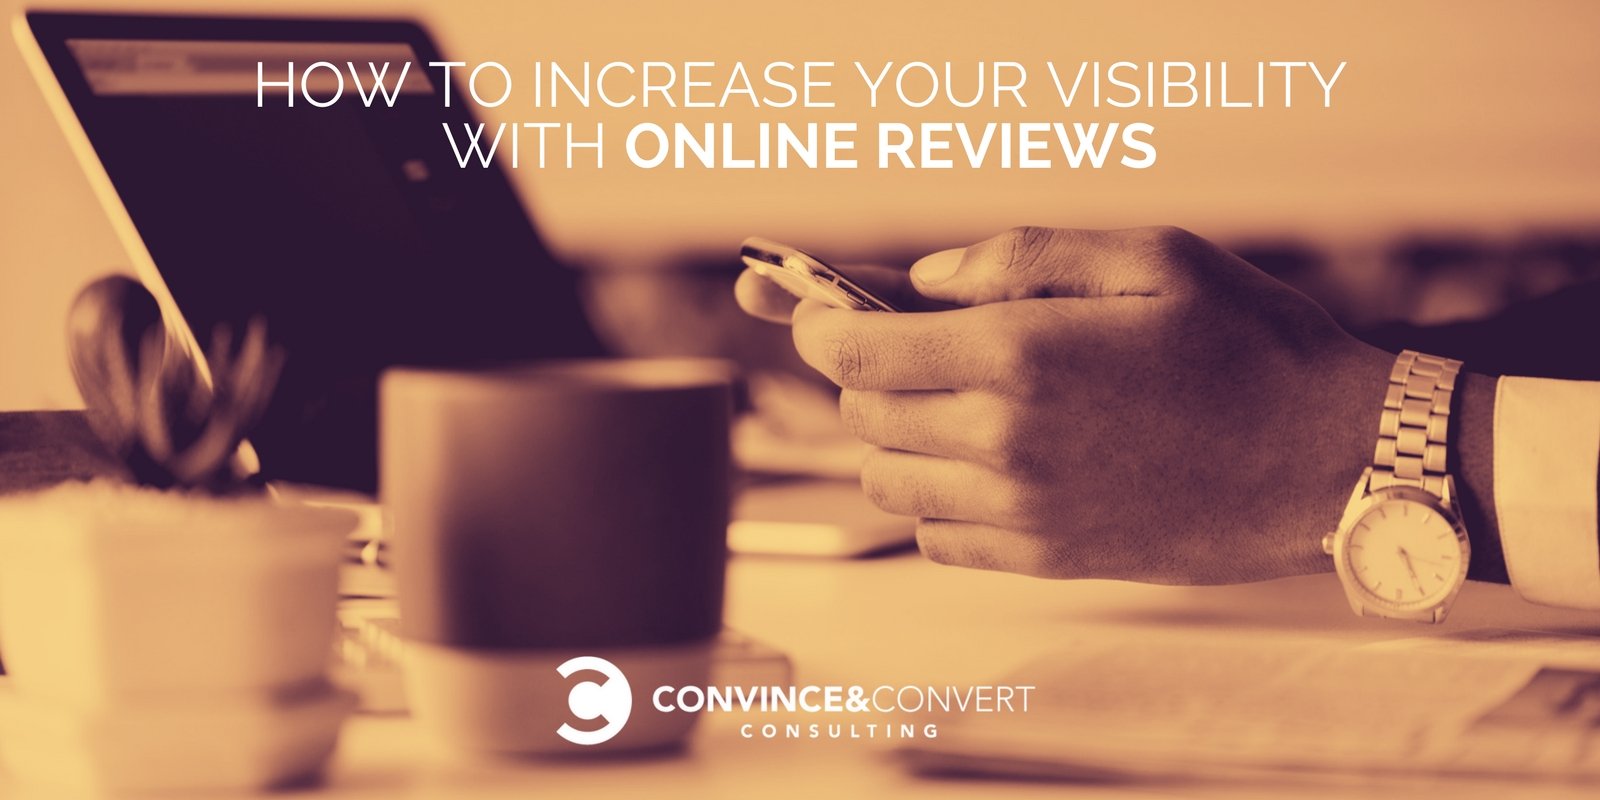 How to Increase Your Visibility with Online Reviews